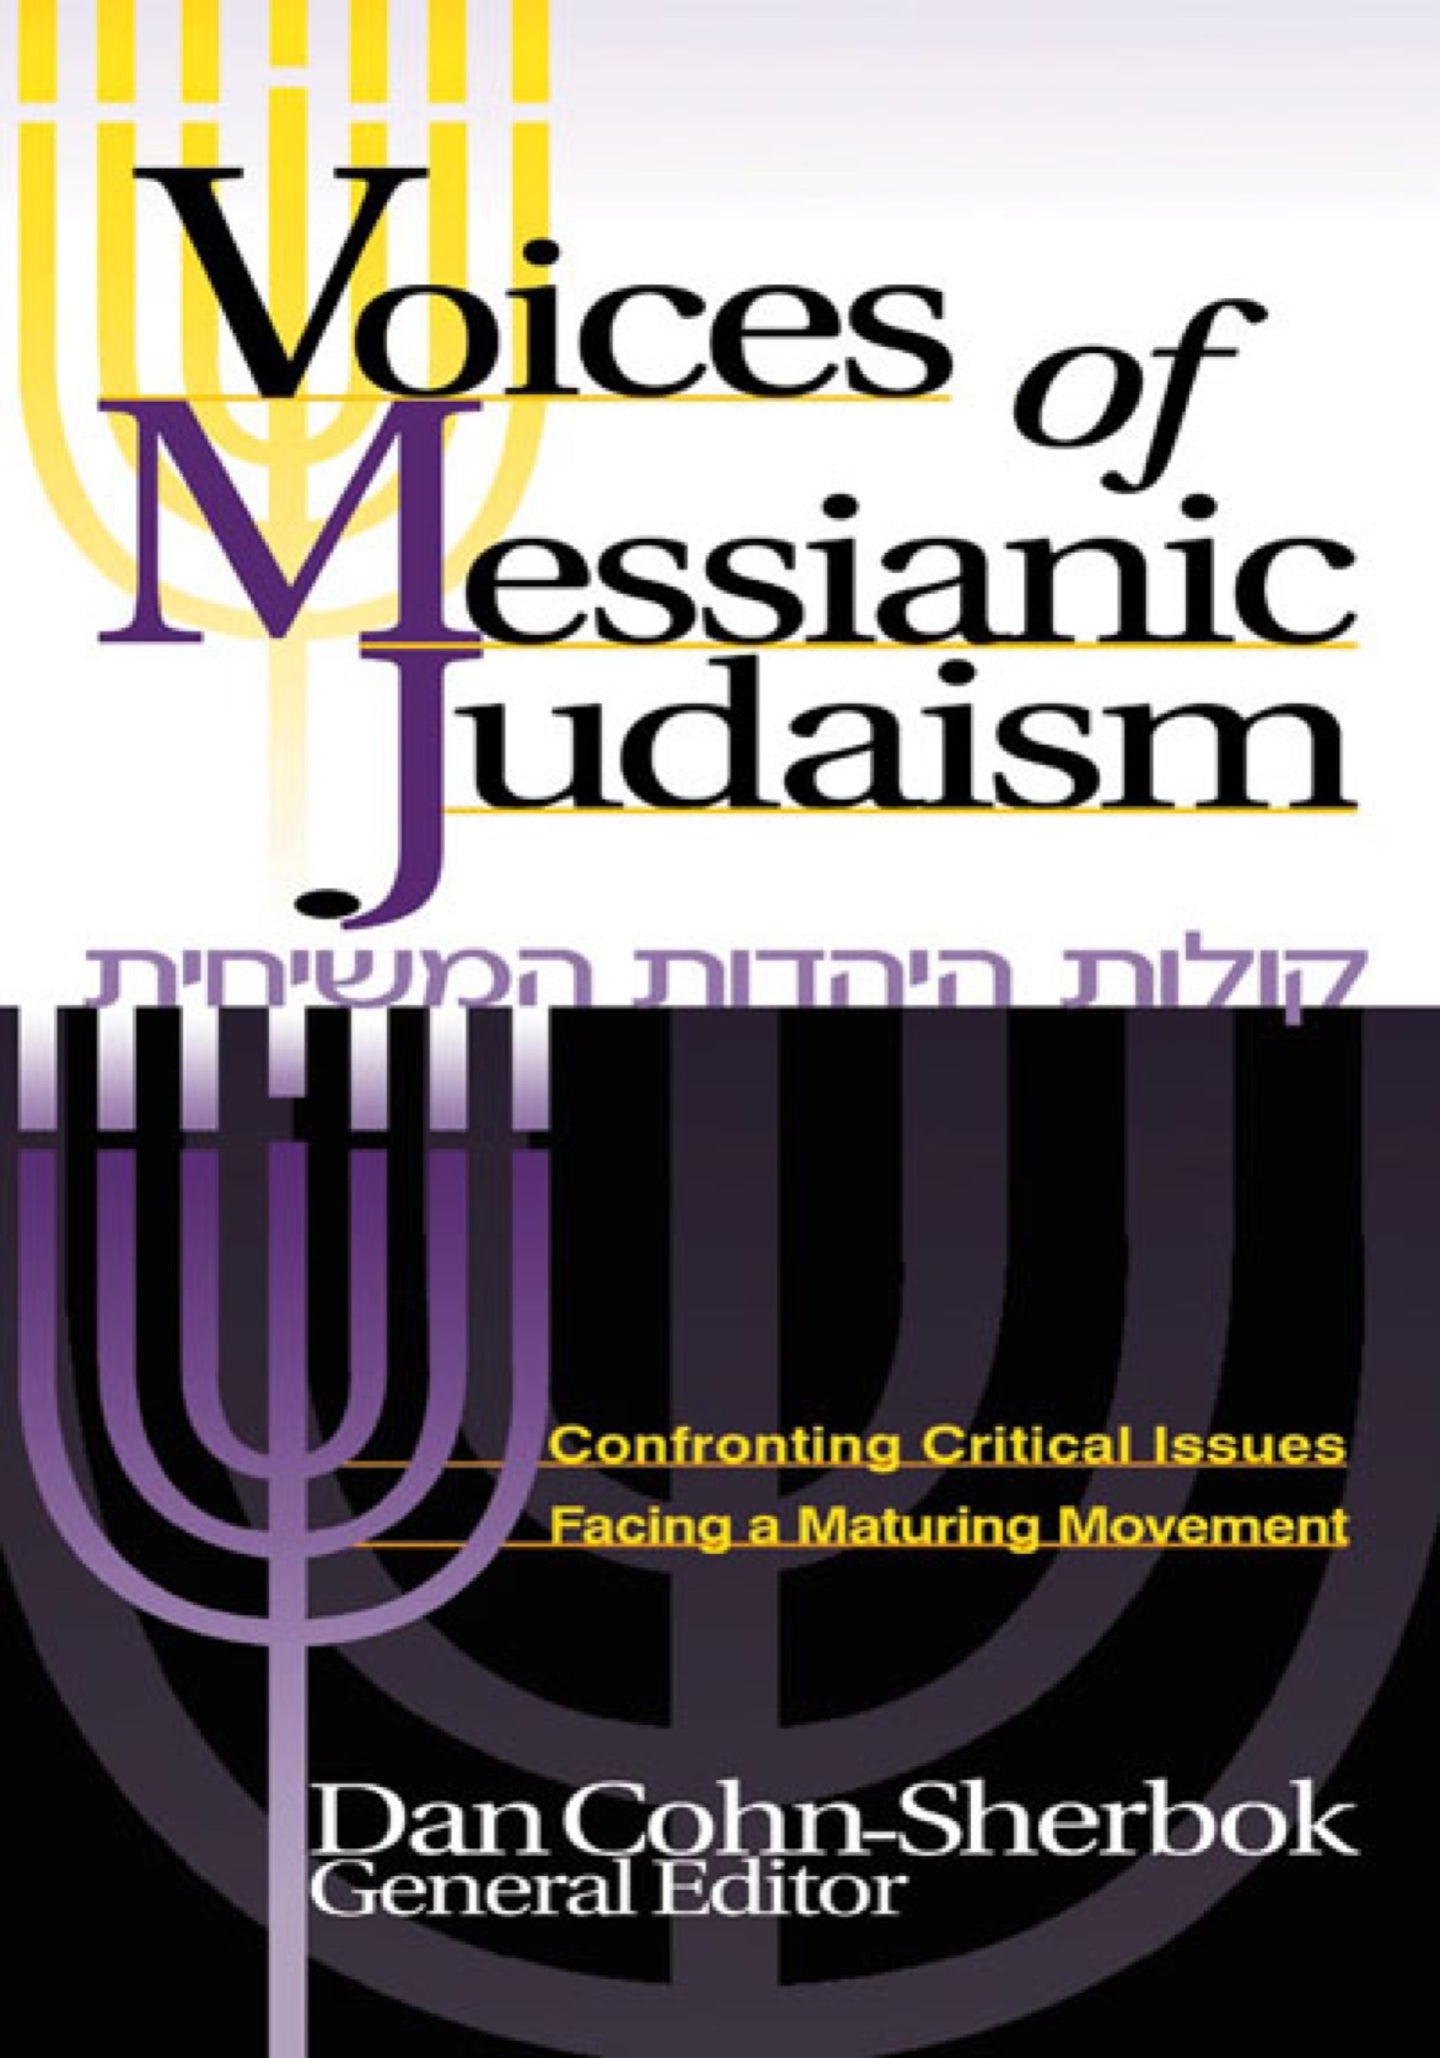 Voices of Messianic Judaism: Confronting Critical Issues Facing a Maturing Movement - General Editor Dan Cohn-Sherbok